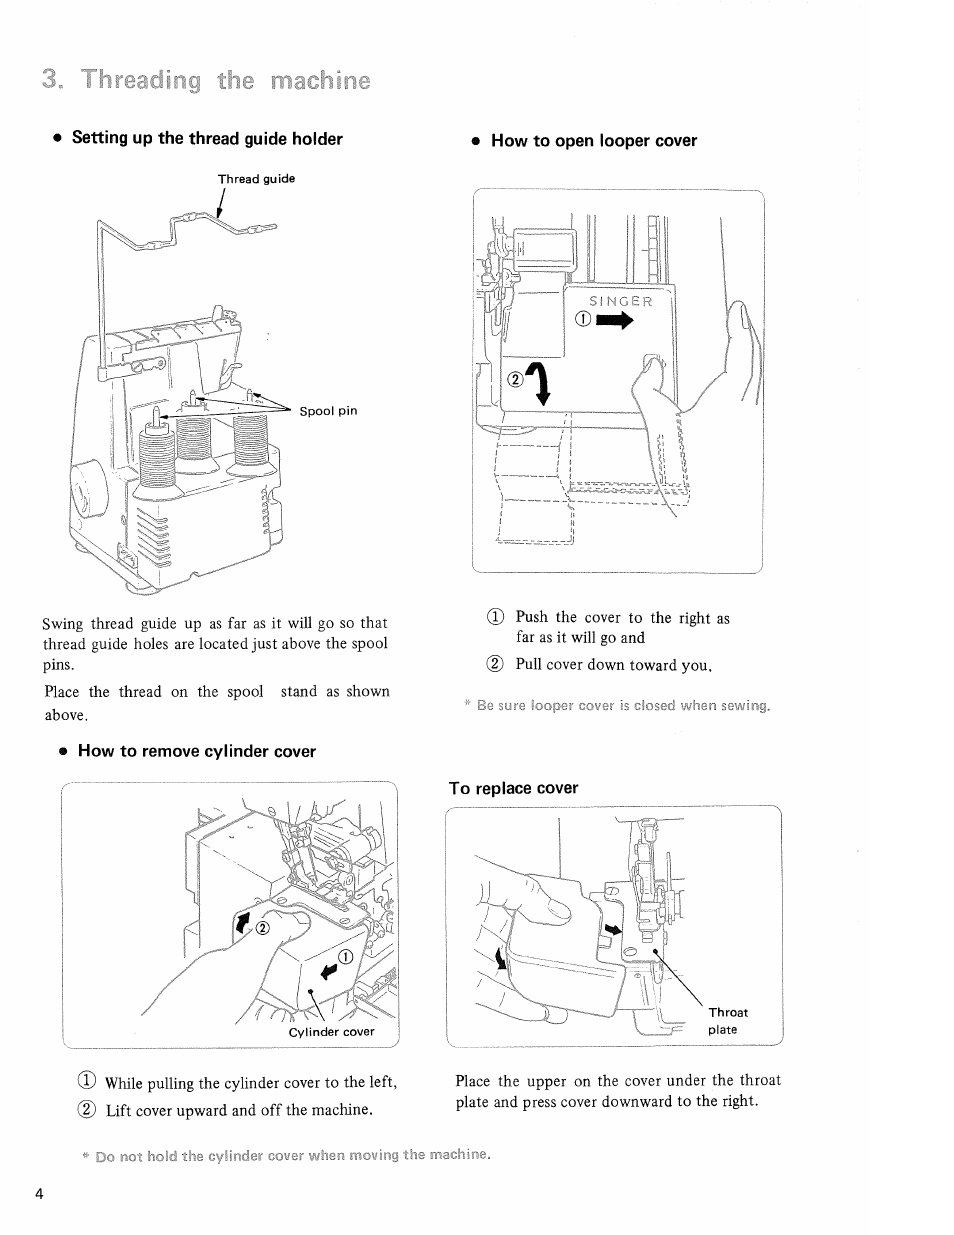 Setting up the thread guide holder, How to remove cylinder cover, To replace cover | SINGER 14U32A Ultralock User Manual | Page 6 / 24